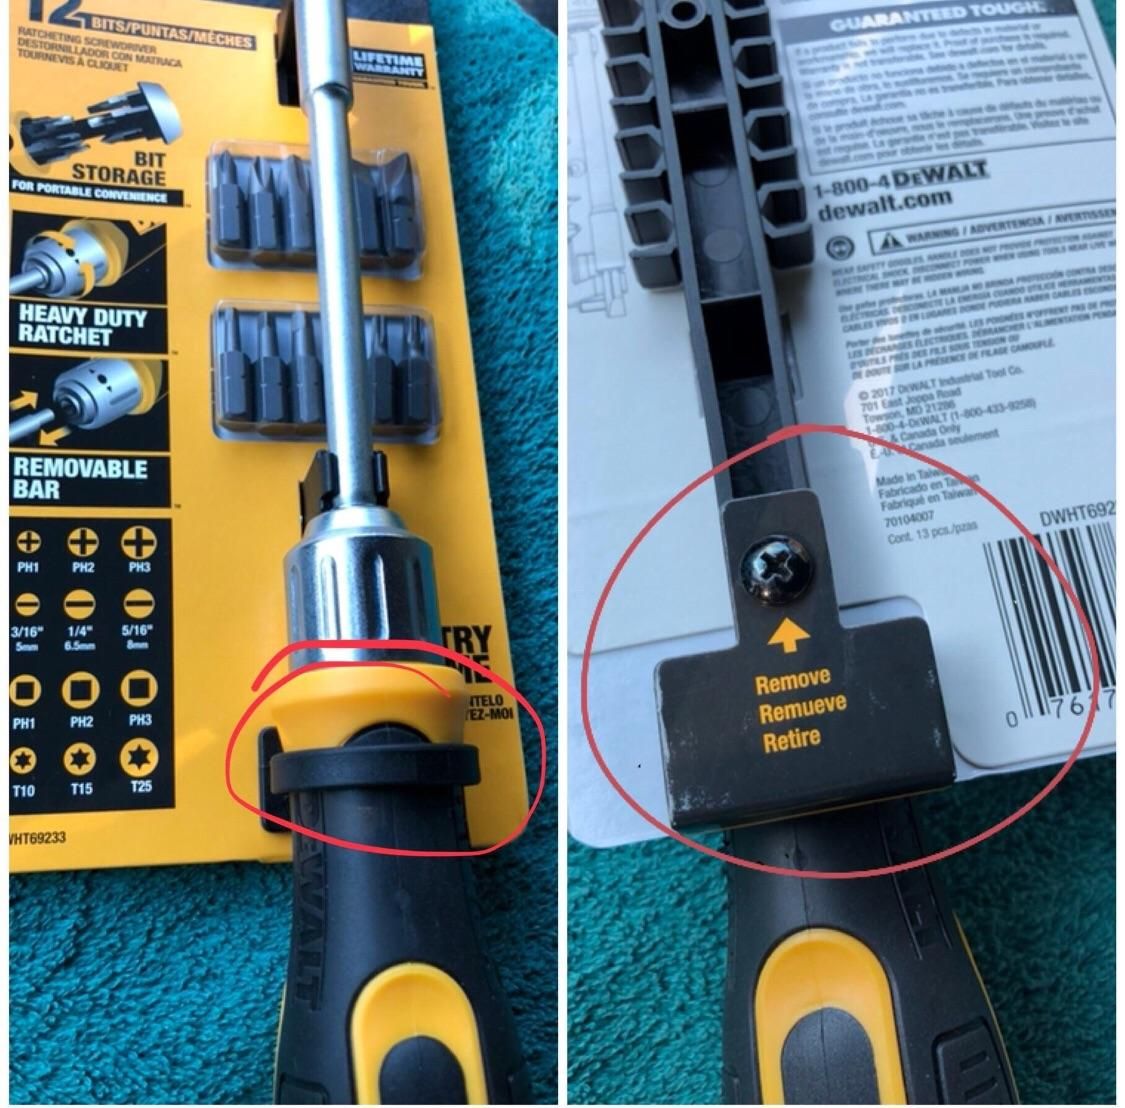 Needed new screwdriver. Packaging requires screwdriver in order to open